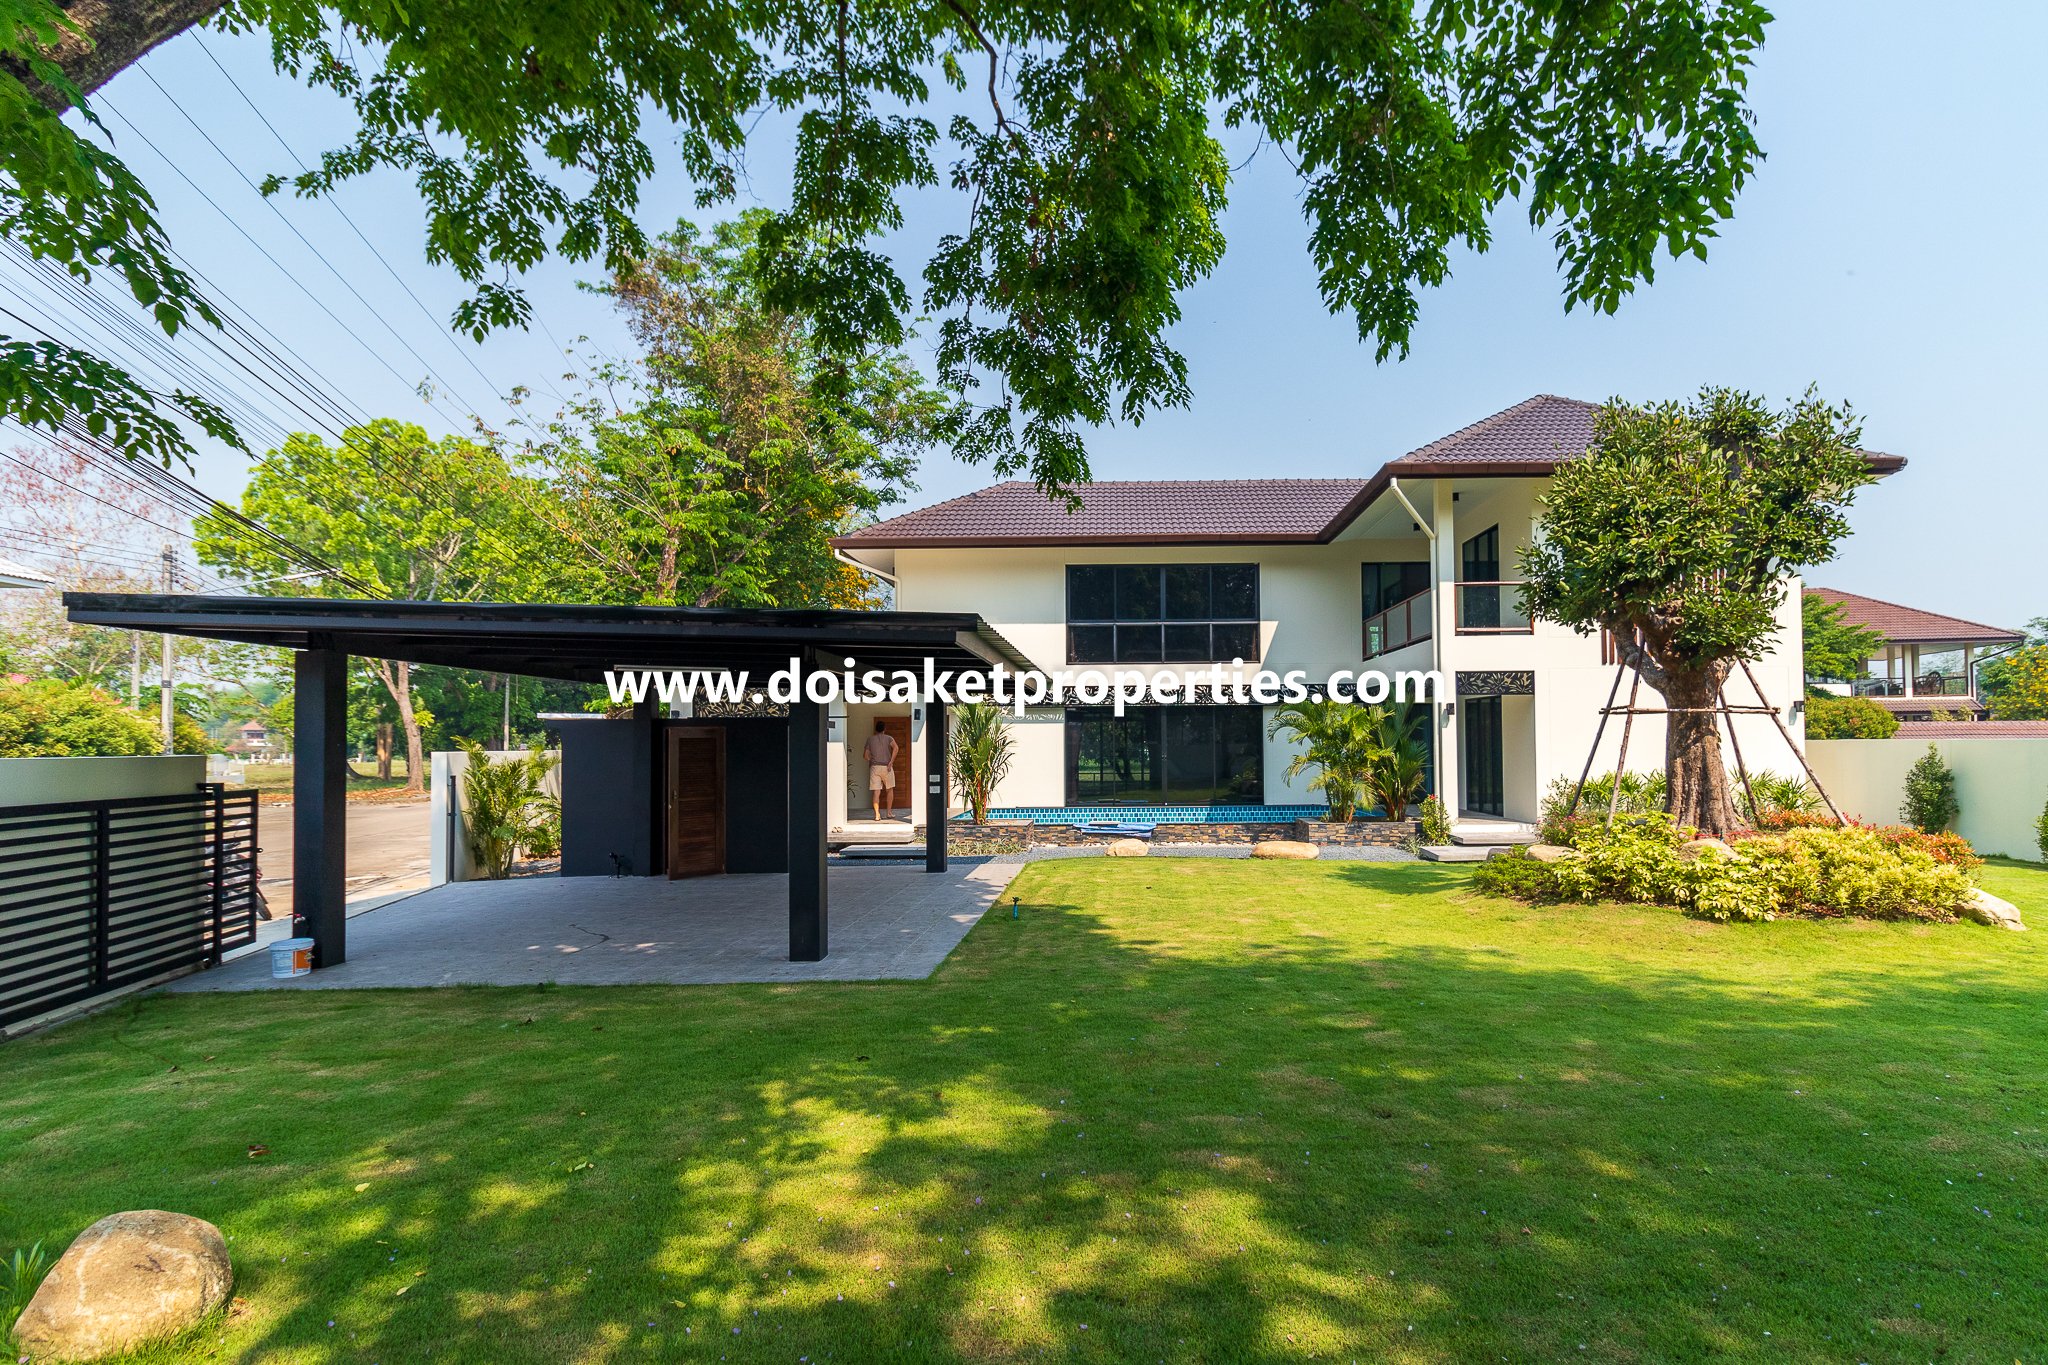 Doi Saket-DSP-(HS348-04) Lovely Brand New 4 Bedroom Home with Swimming Pool for Sale in a Secure Moo Baan in Doi Saket